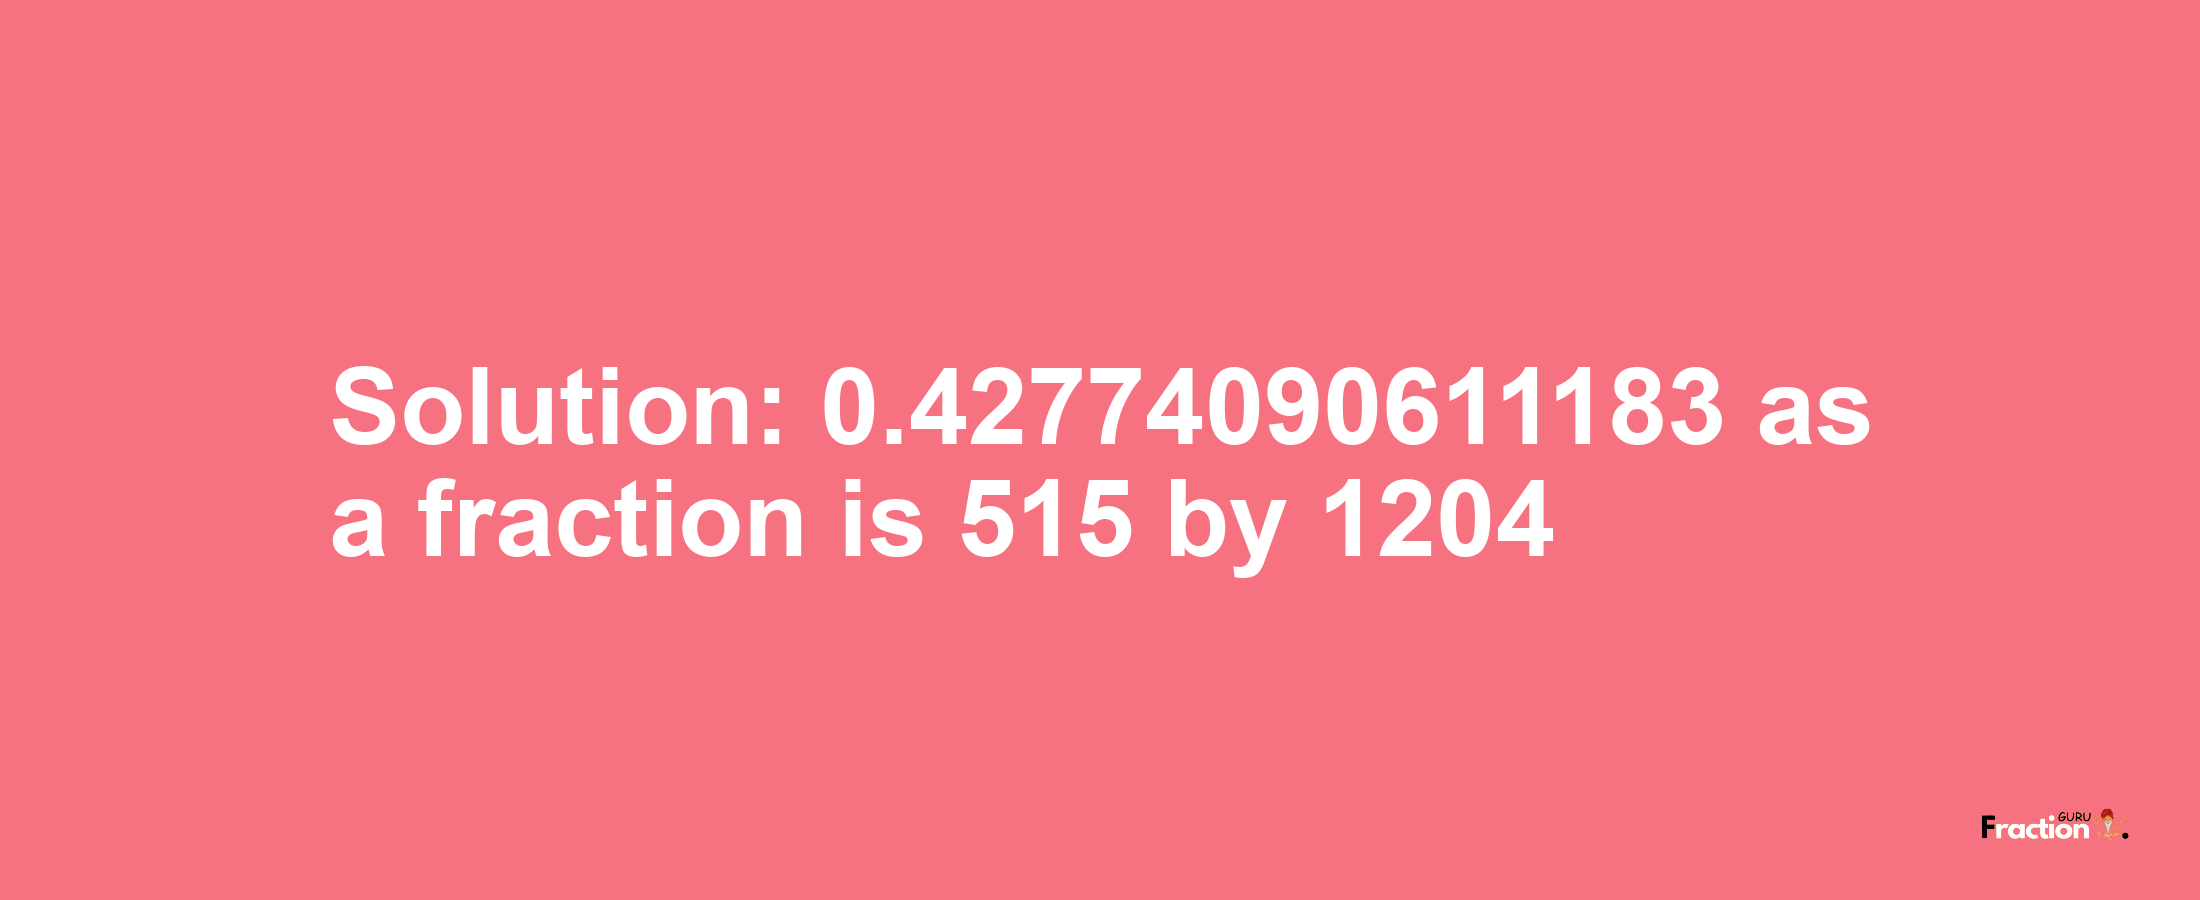 Solution:0.42774090611183 as a fraction is 515/1204